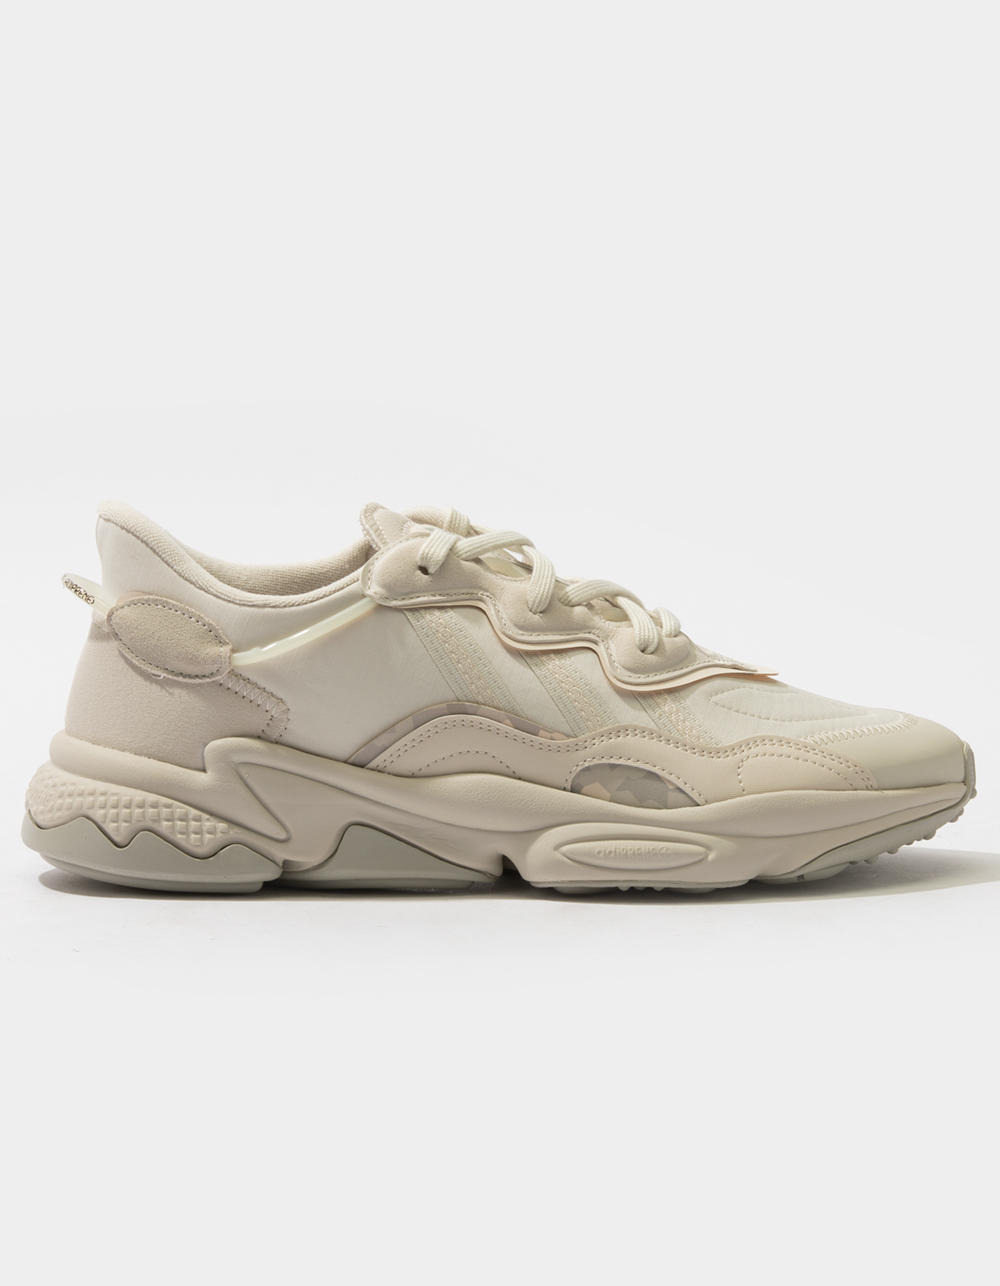 ADIDAS Ozweego Shoes - OFF WHITE | Tillys